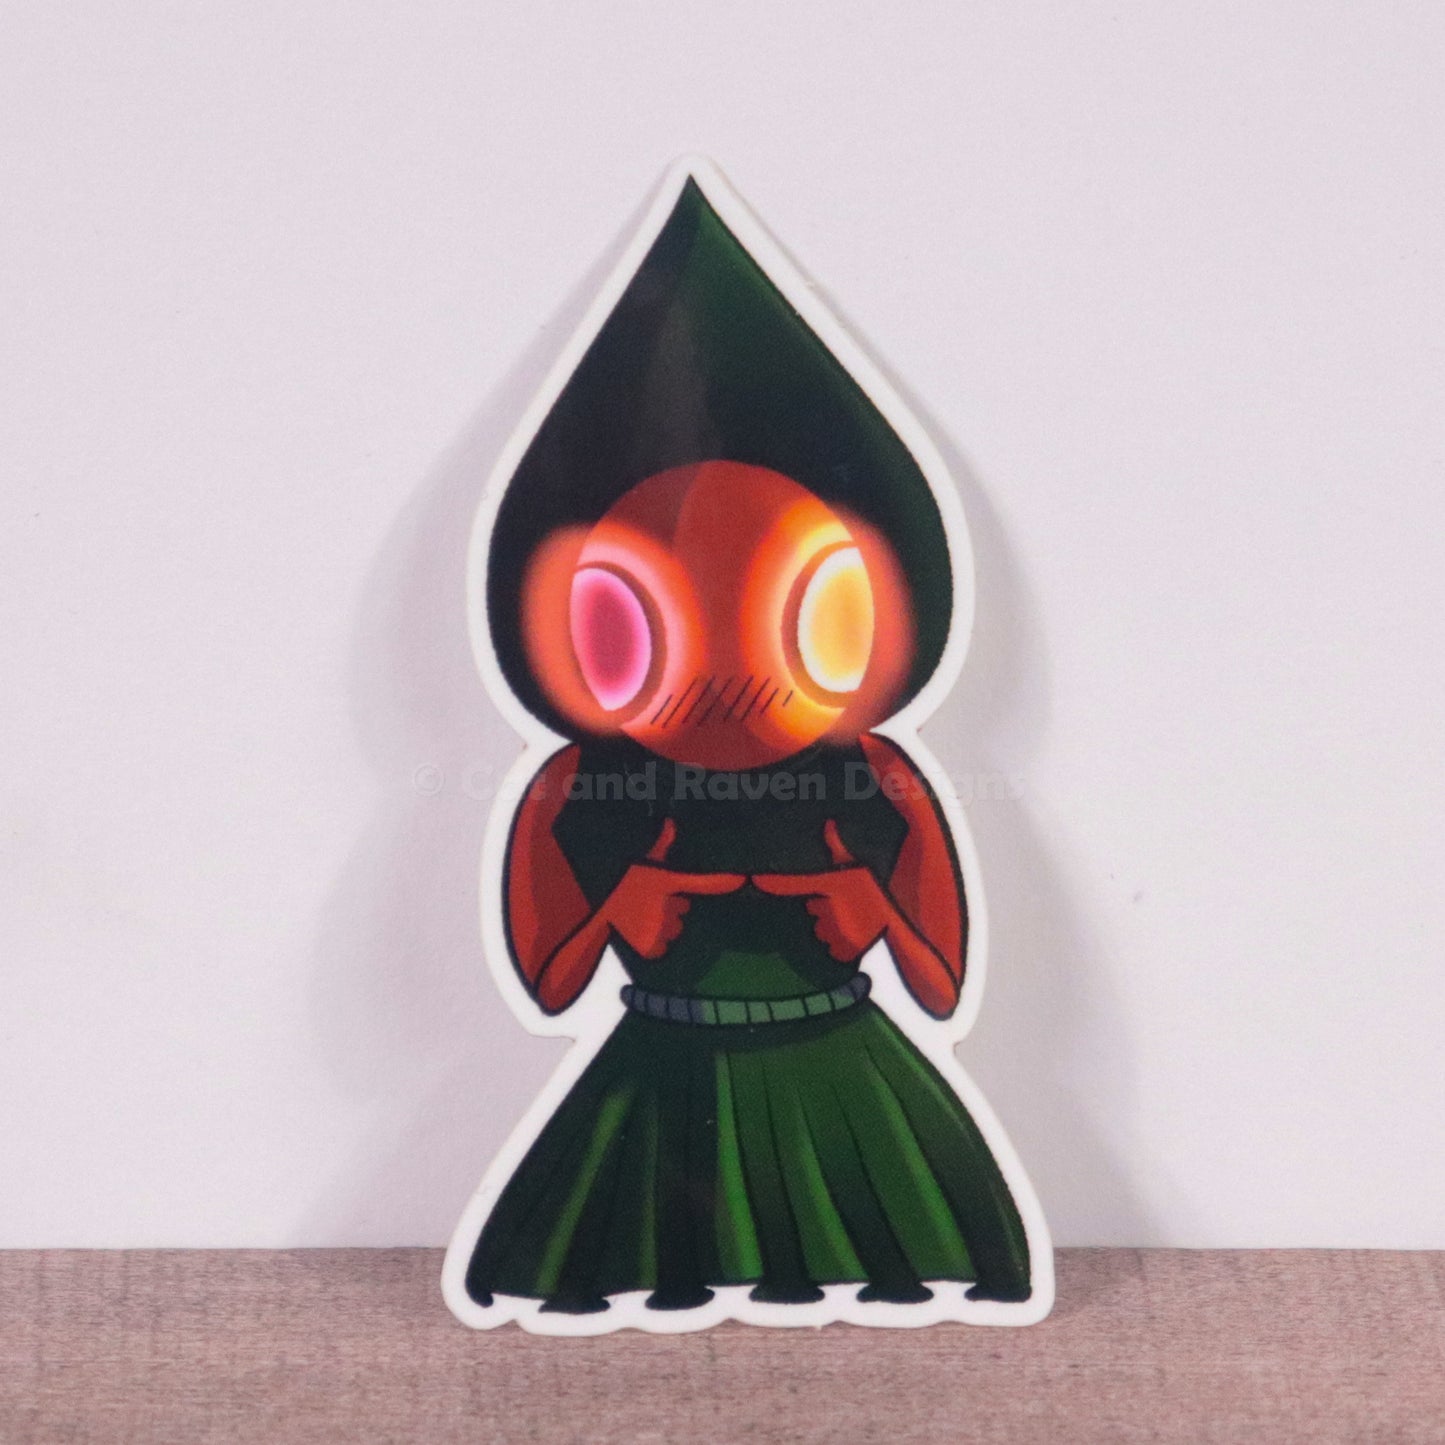 Flatwoods Monster Cryptid cuties vinyl stickers